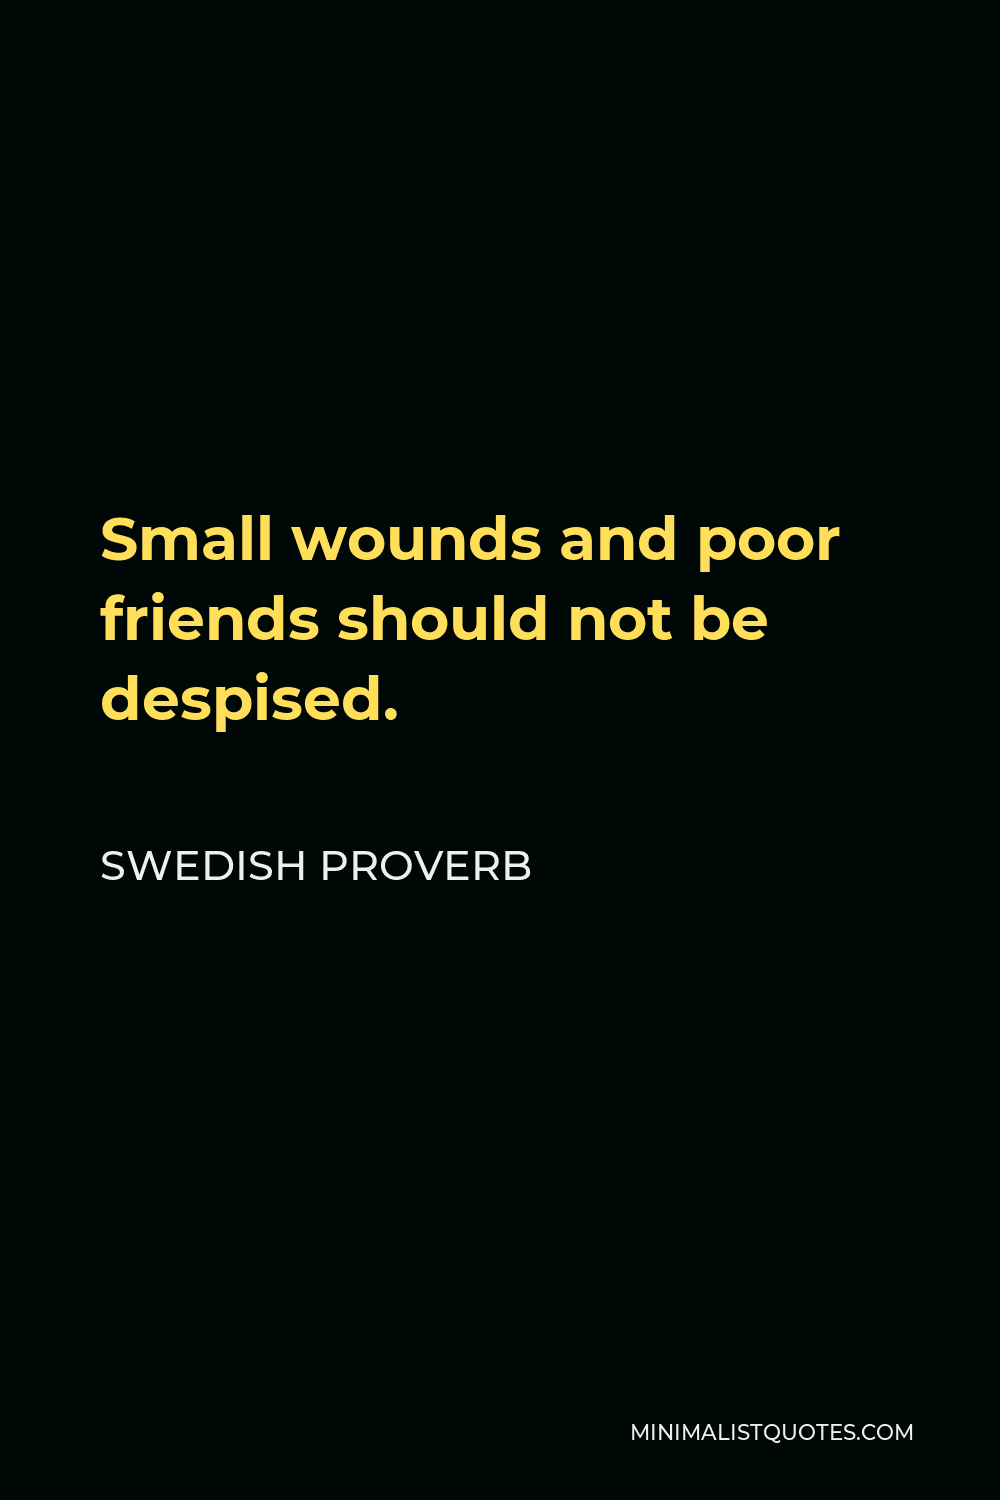 Swedish Proverb Quote - Small wounds and poor friends should not be despised.